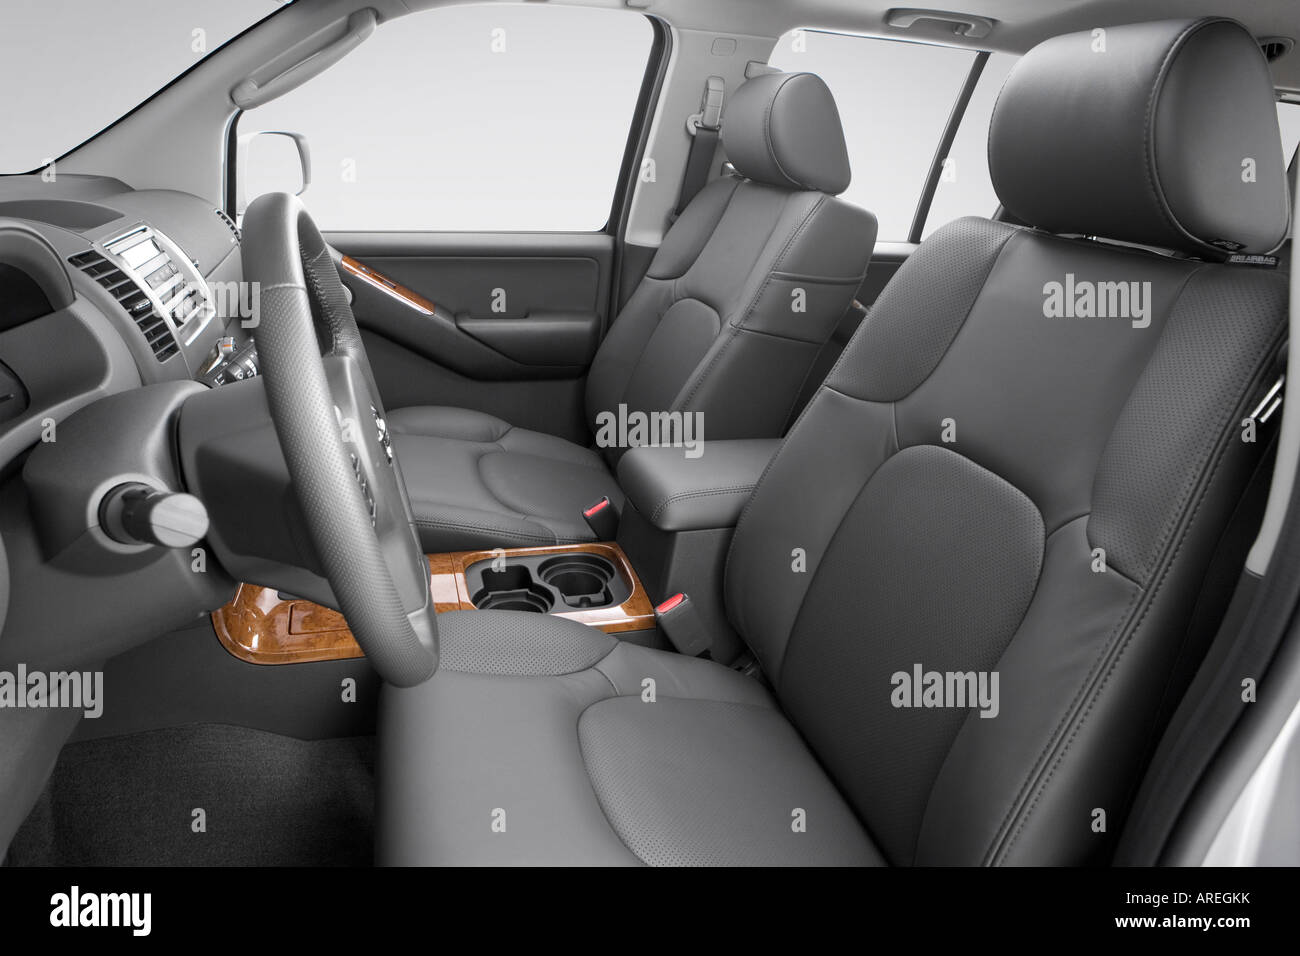 2006 Nissan Pathfinder LE in Silver - Front seats Stock Photo